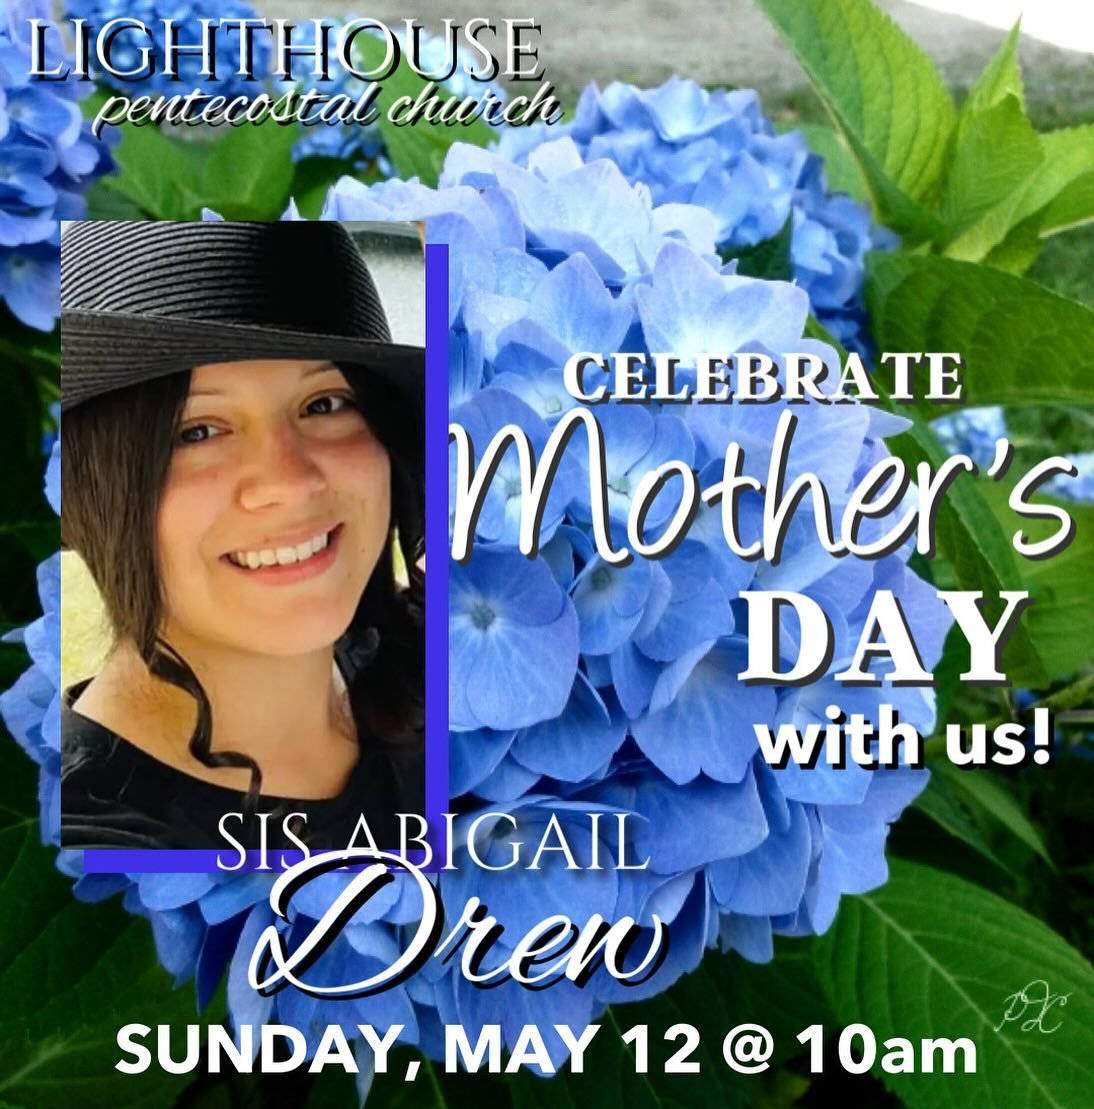 💙🪻Join us for a special MOTHER&rsquo;S DAY CELEBRATION at the Lighthouse! Sunday, May 12 @ 10am! Sis Abigail Drew will be ministering. We 💙our Moms!! 🪻💙#lighthousepentecostalchurch #beebe #beebearkansas #pentecostal #apostolic #mothersday